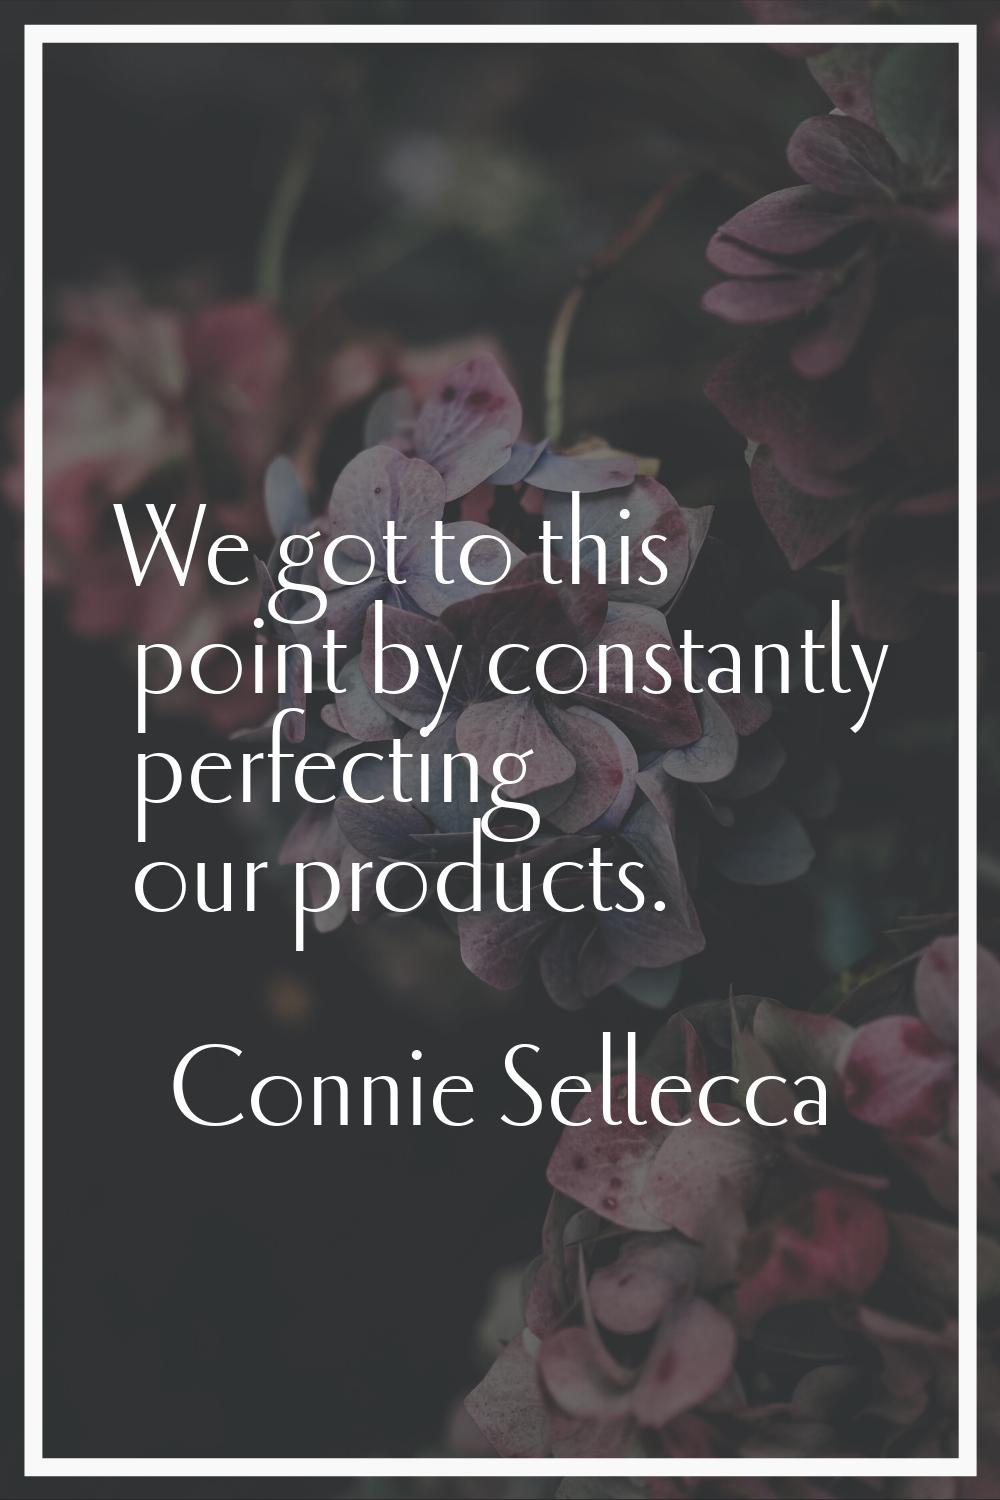 We got to this point by constantly perfecting our products.